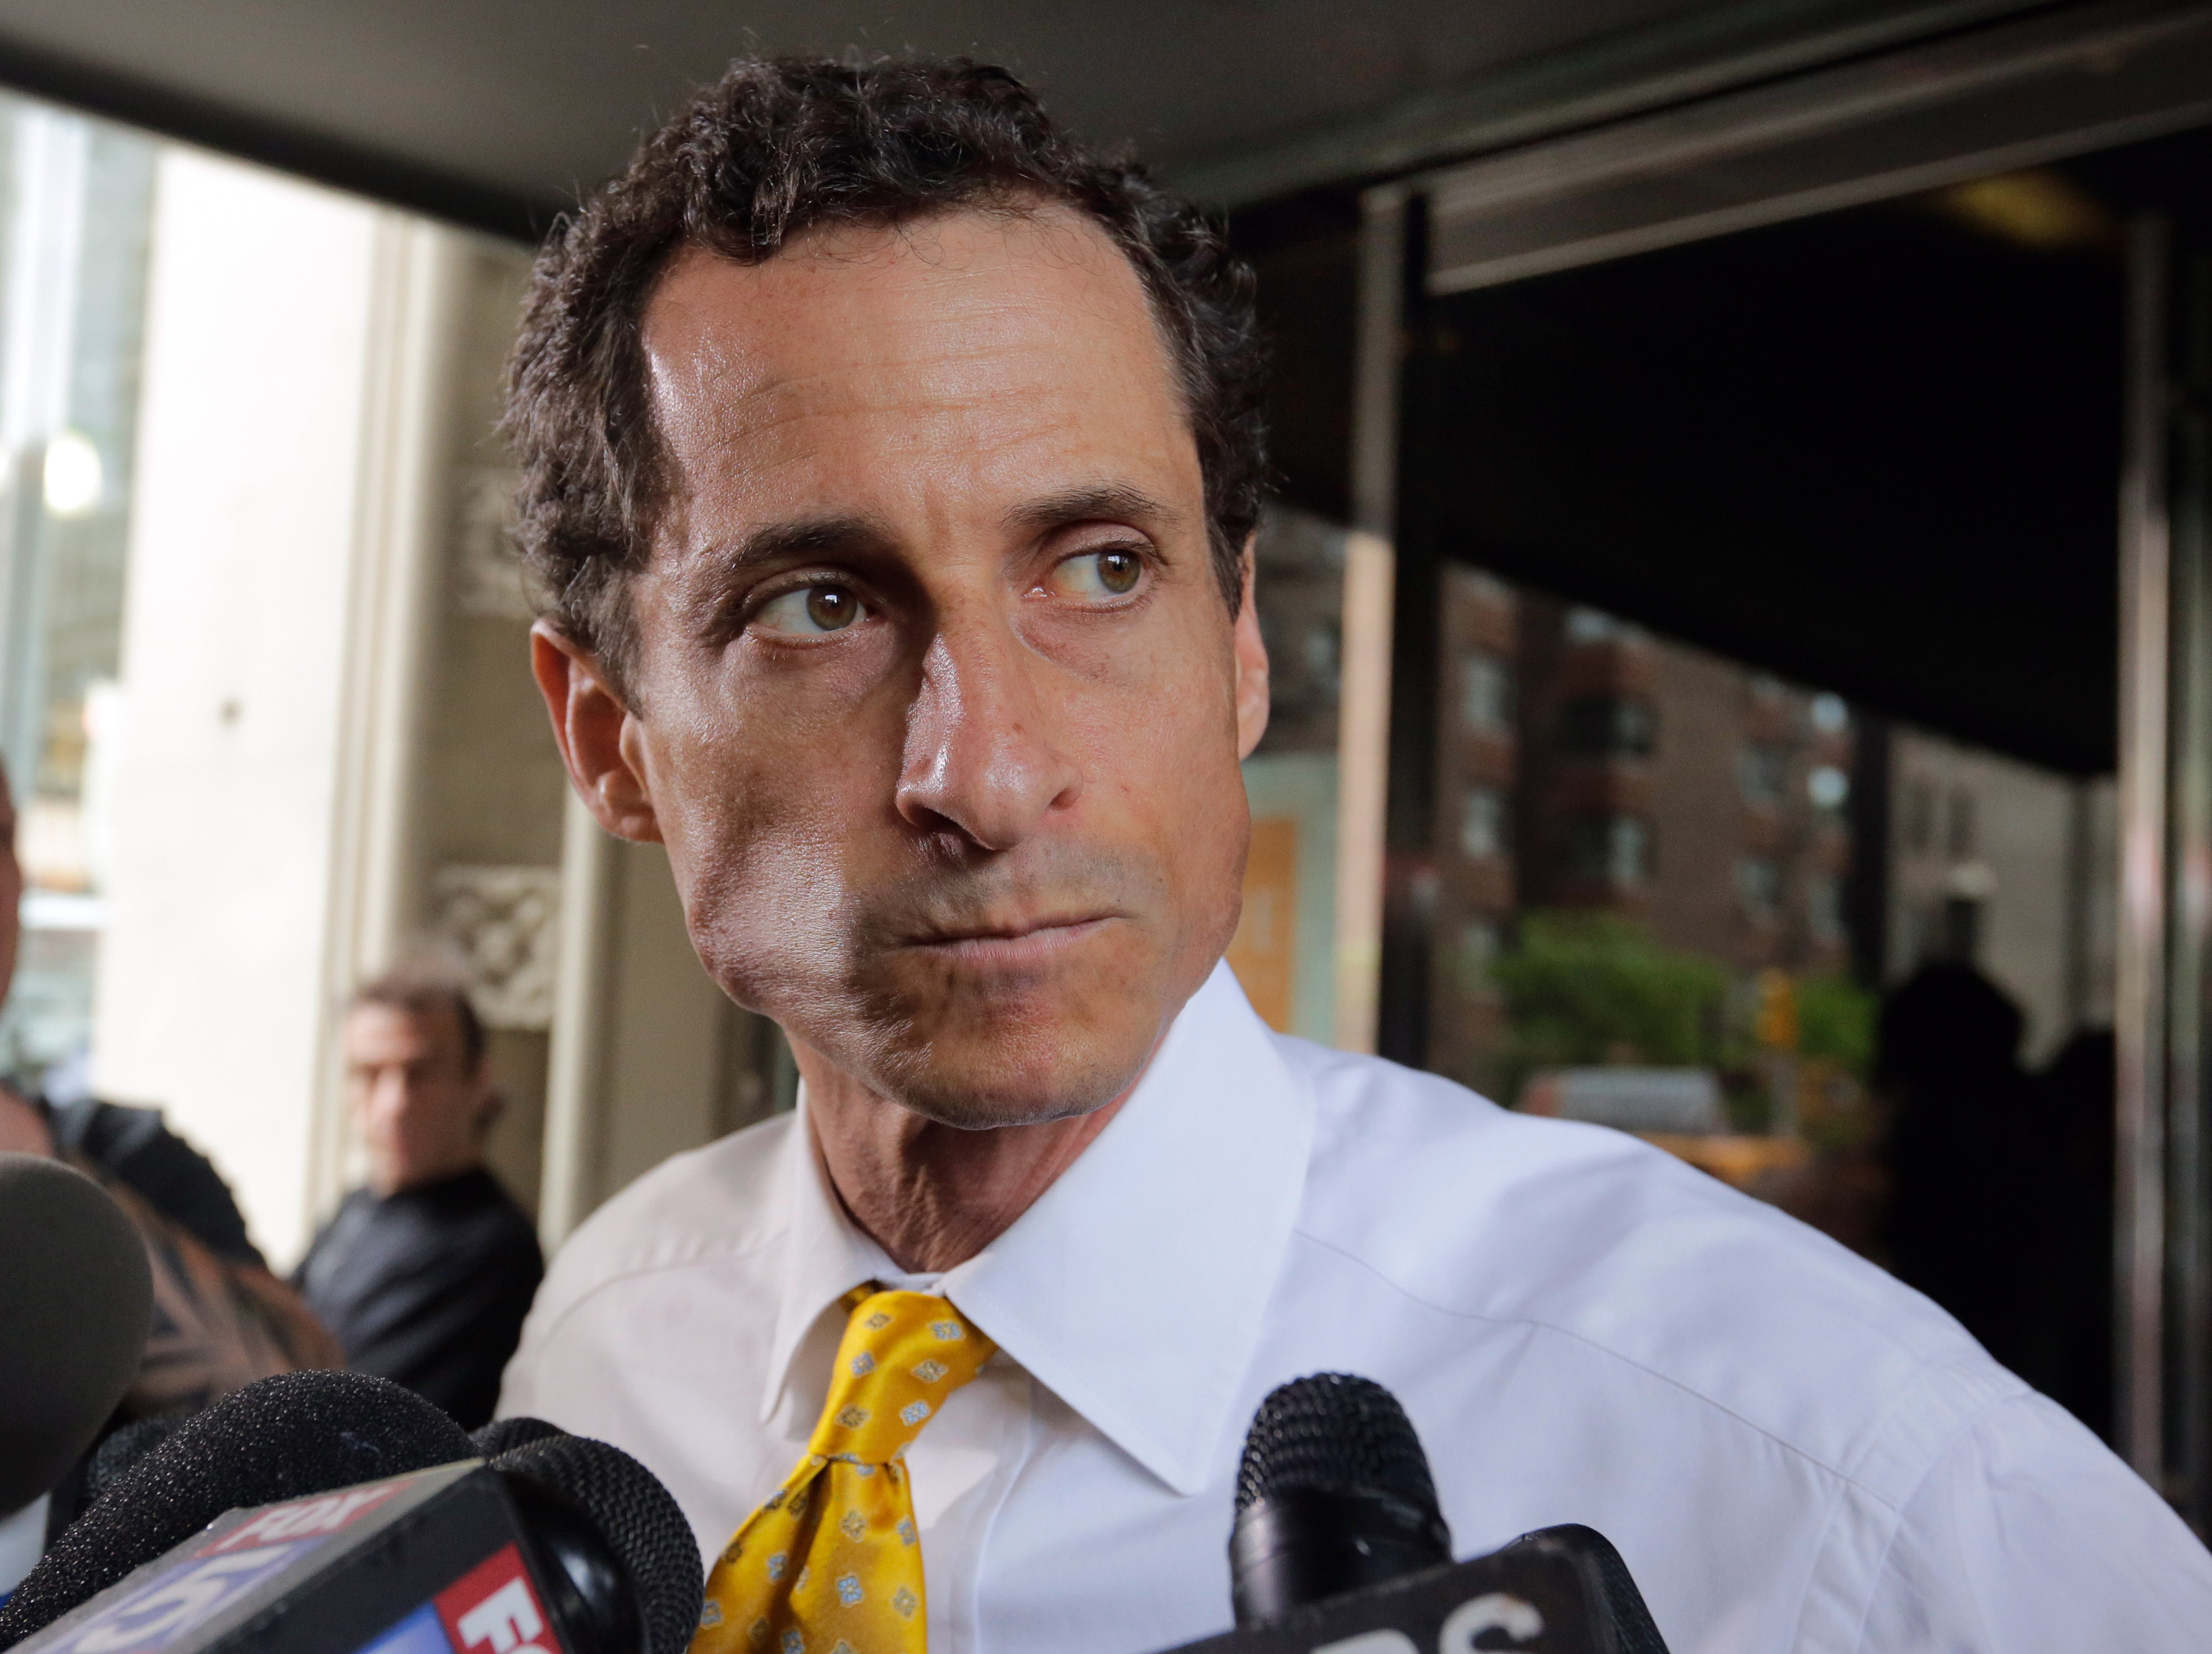 Former U.S. Congressman and current New York mayoral candidate Anthony Weiner leaves his apartment building, in New York, Wednesday, July 24, 2013. On Tuesday Weiner made a public mea culpa for a newfound sexting scandal that erupted amid the mayoral run he hopes will rewrite his political future. (AP Photo/Richard Drew)